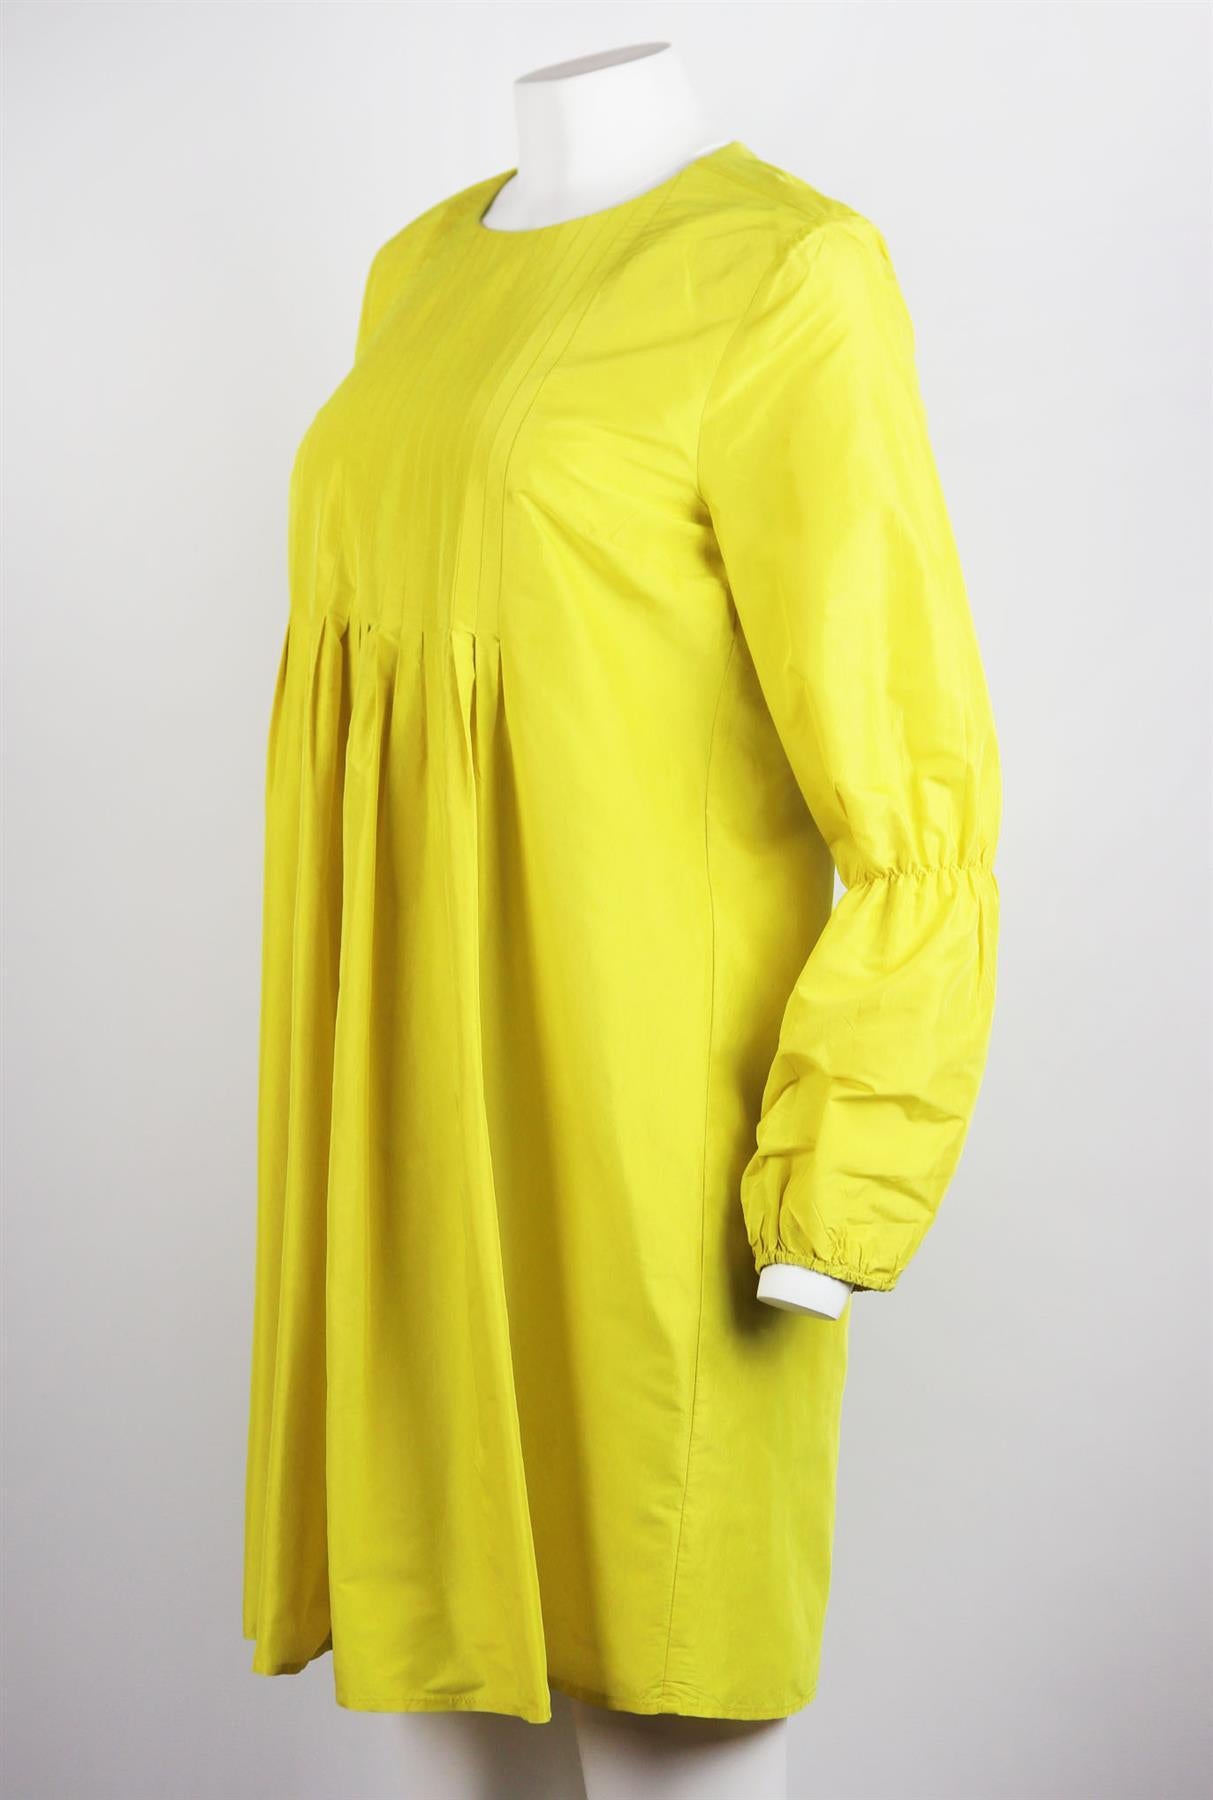 Cynthia Rowley's dresses always feel so feminine, even when they're as understated as this one, it's cut from silk and has a softly pleated detail on the bust which reveals a full skirt and sleeves. Yellow silk. Slips on. 100% Silk; lining: 100%